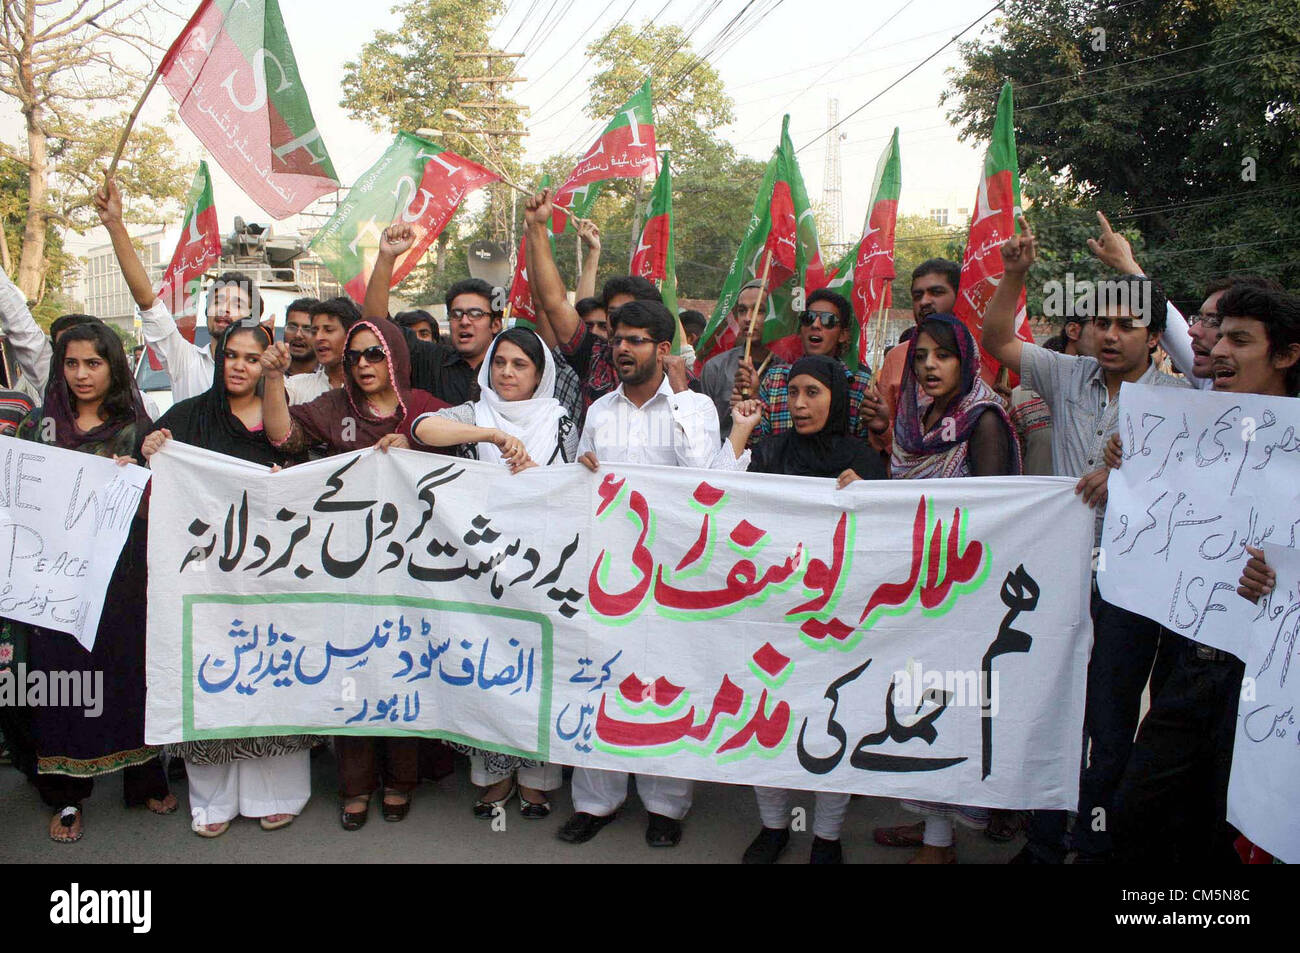 Activists of Insaf Students Federation (ISF) chant slogans  against attack on Malala Yousaf Zai during a protest demonstration at Lahore press club on  Wednesday, October 10, 2012. Malala Yousaf Zai, a child rights activist and National Peace  Award winner, was critically injured, along with another girl student, after a gunman shot her on  Tuesday in Mingora town of district Swat while she returning home from school on a van. Stock Photo